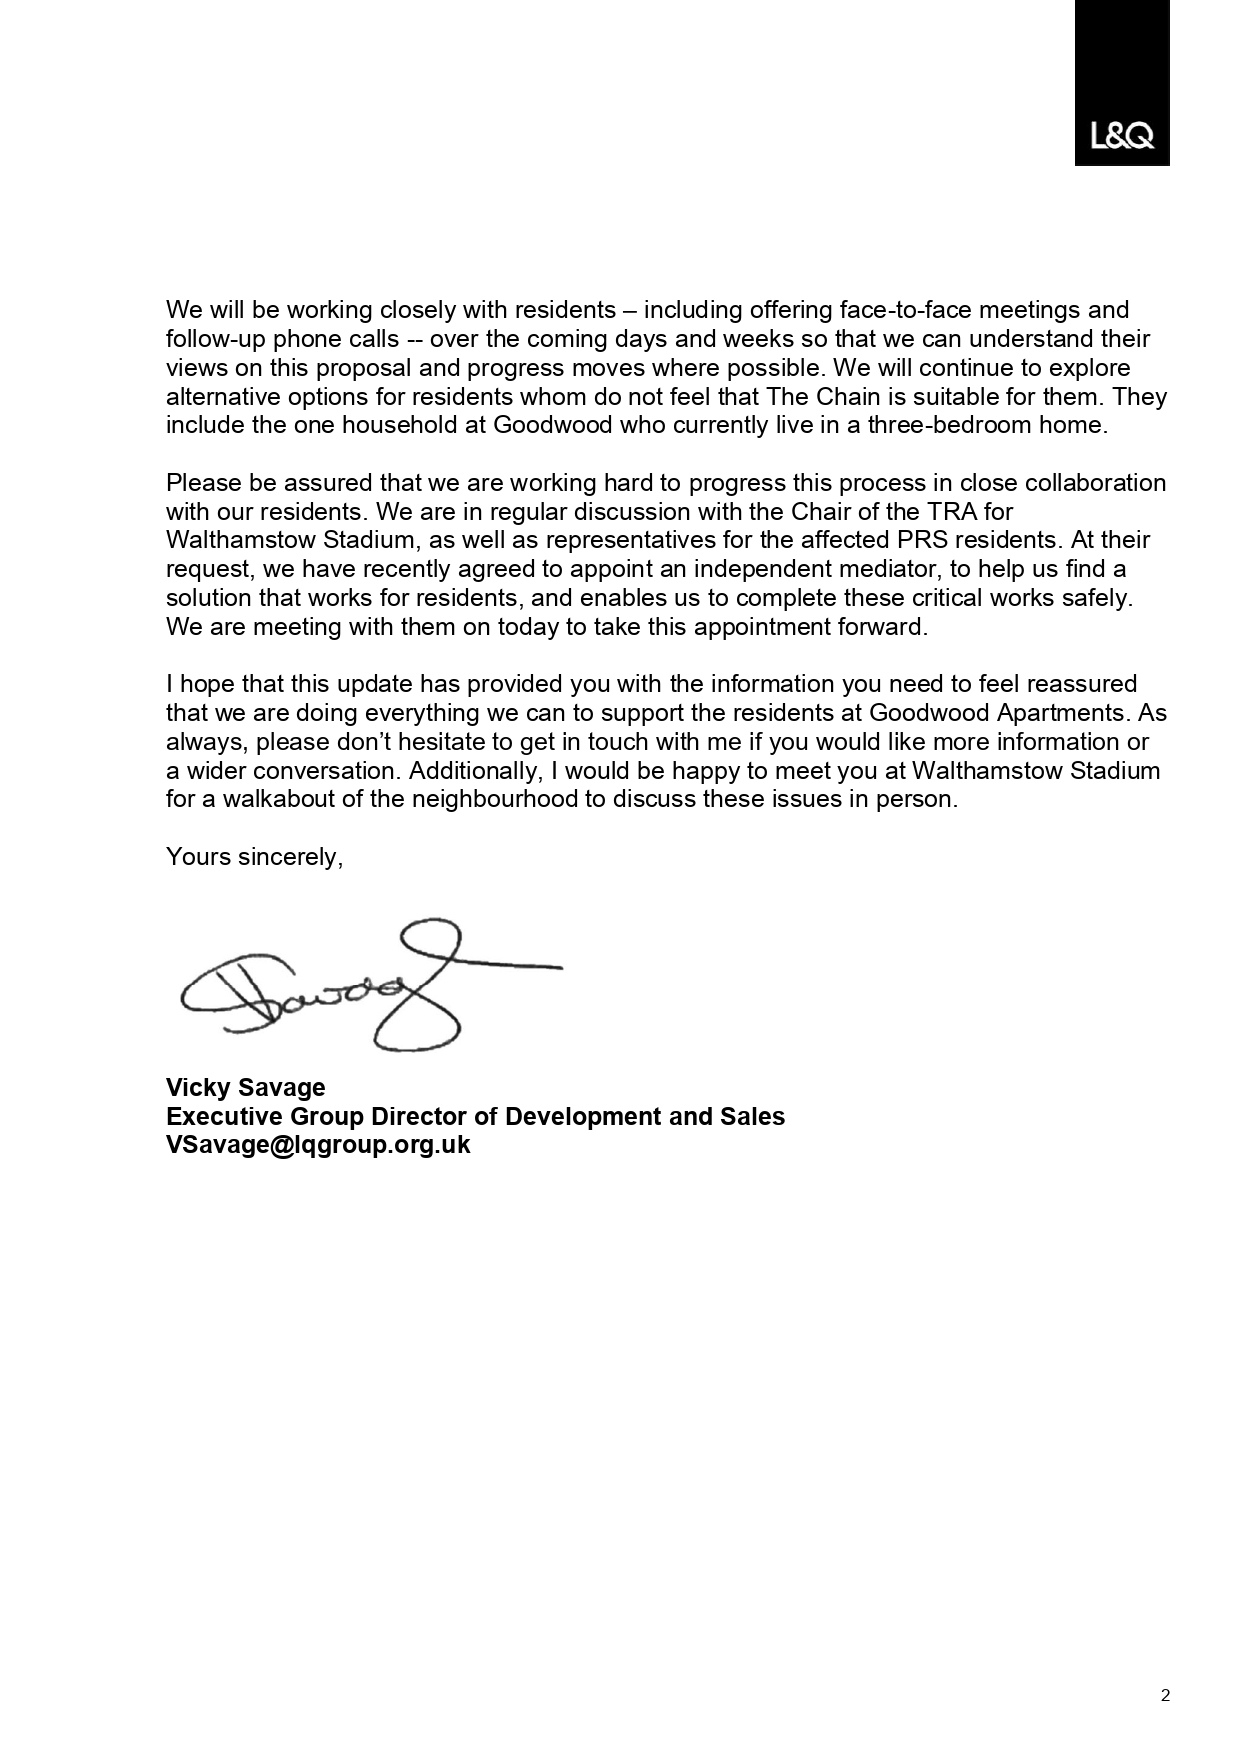 Letter from L&Q detailing their offer to residents - page 2